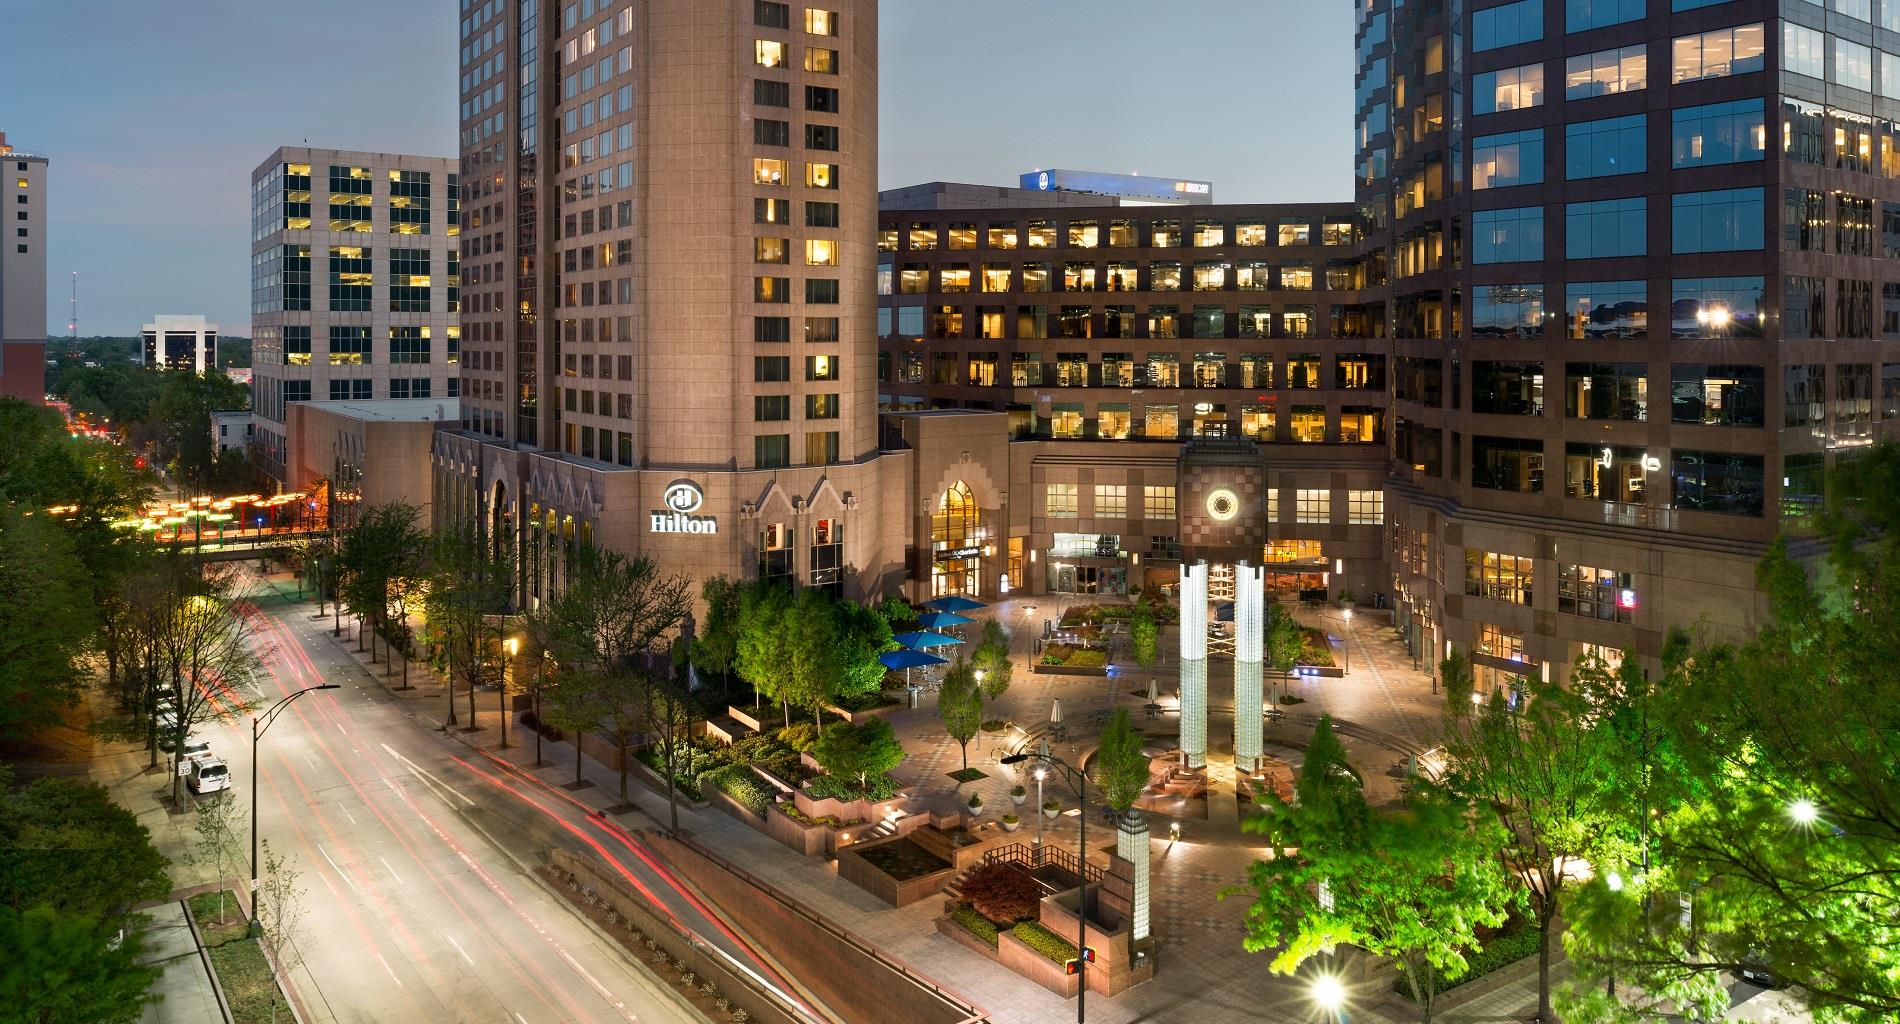 Stay in the City Package - Hilton Charlotte Center CityHilton ...